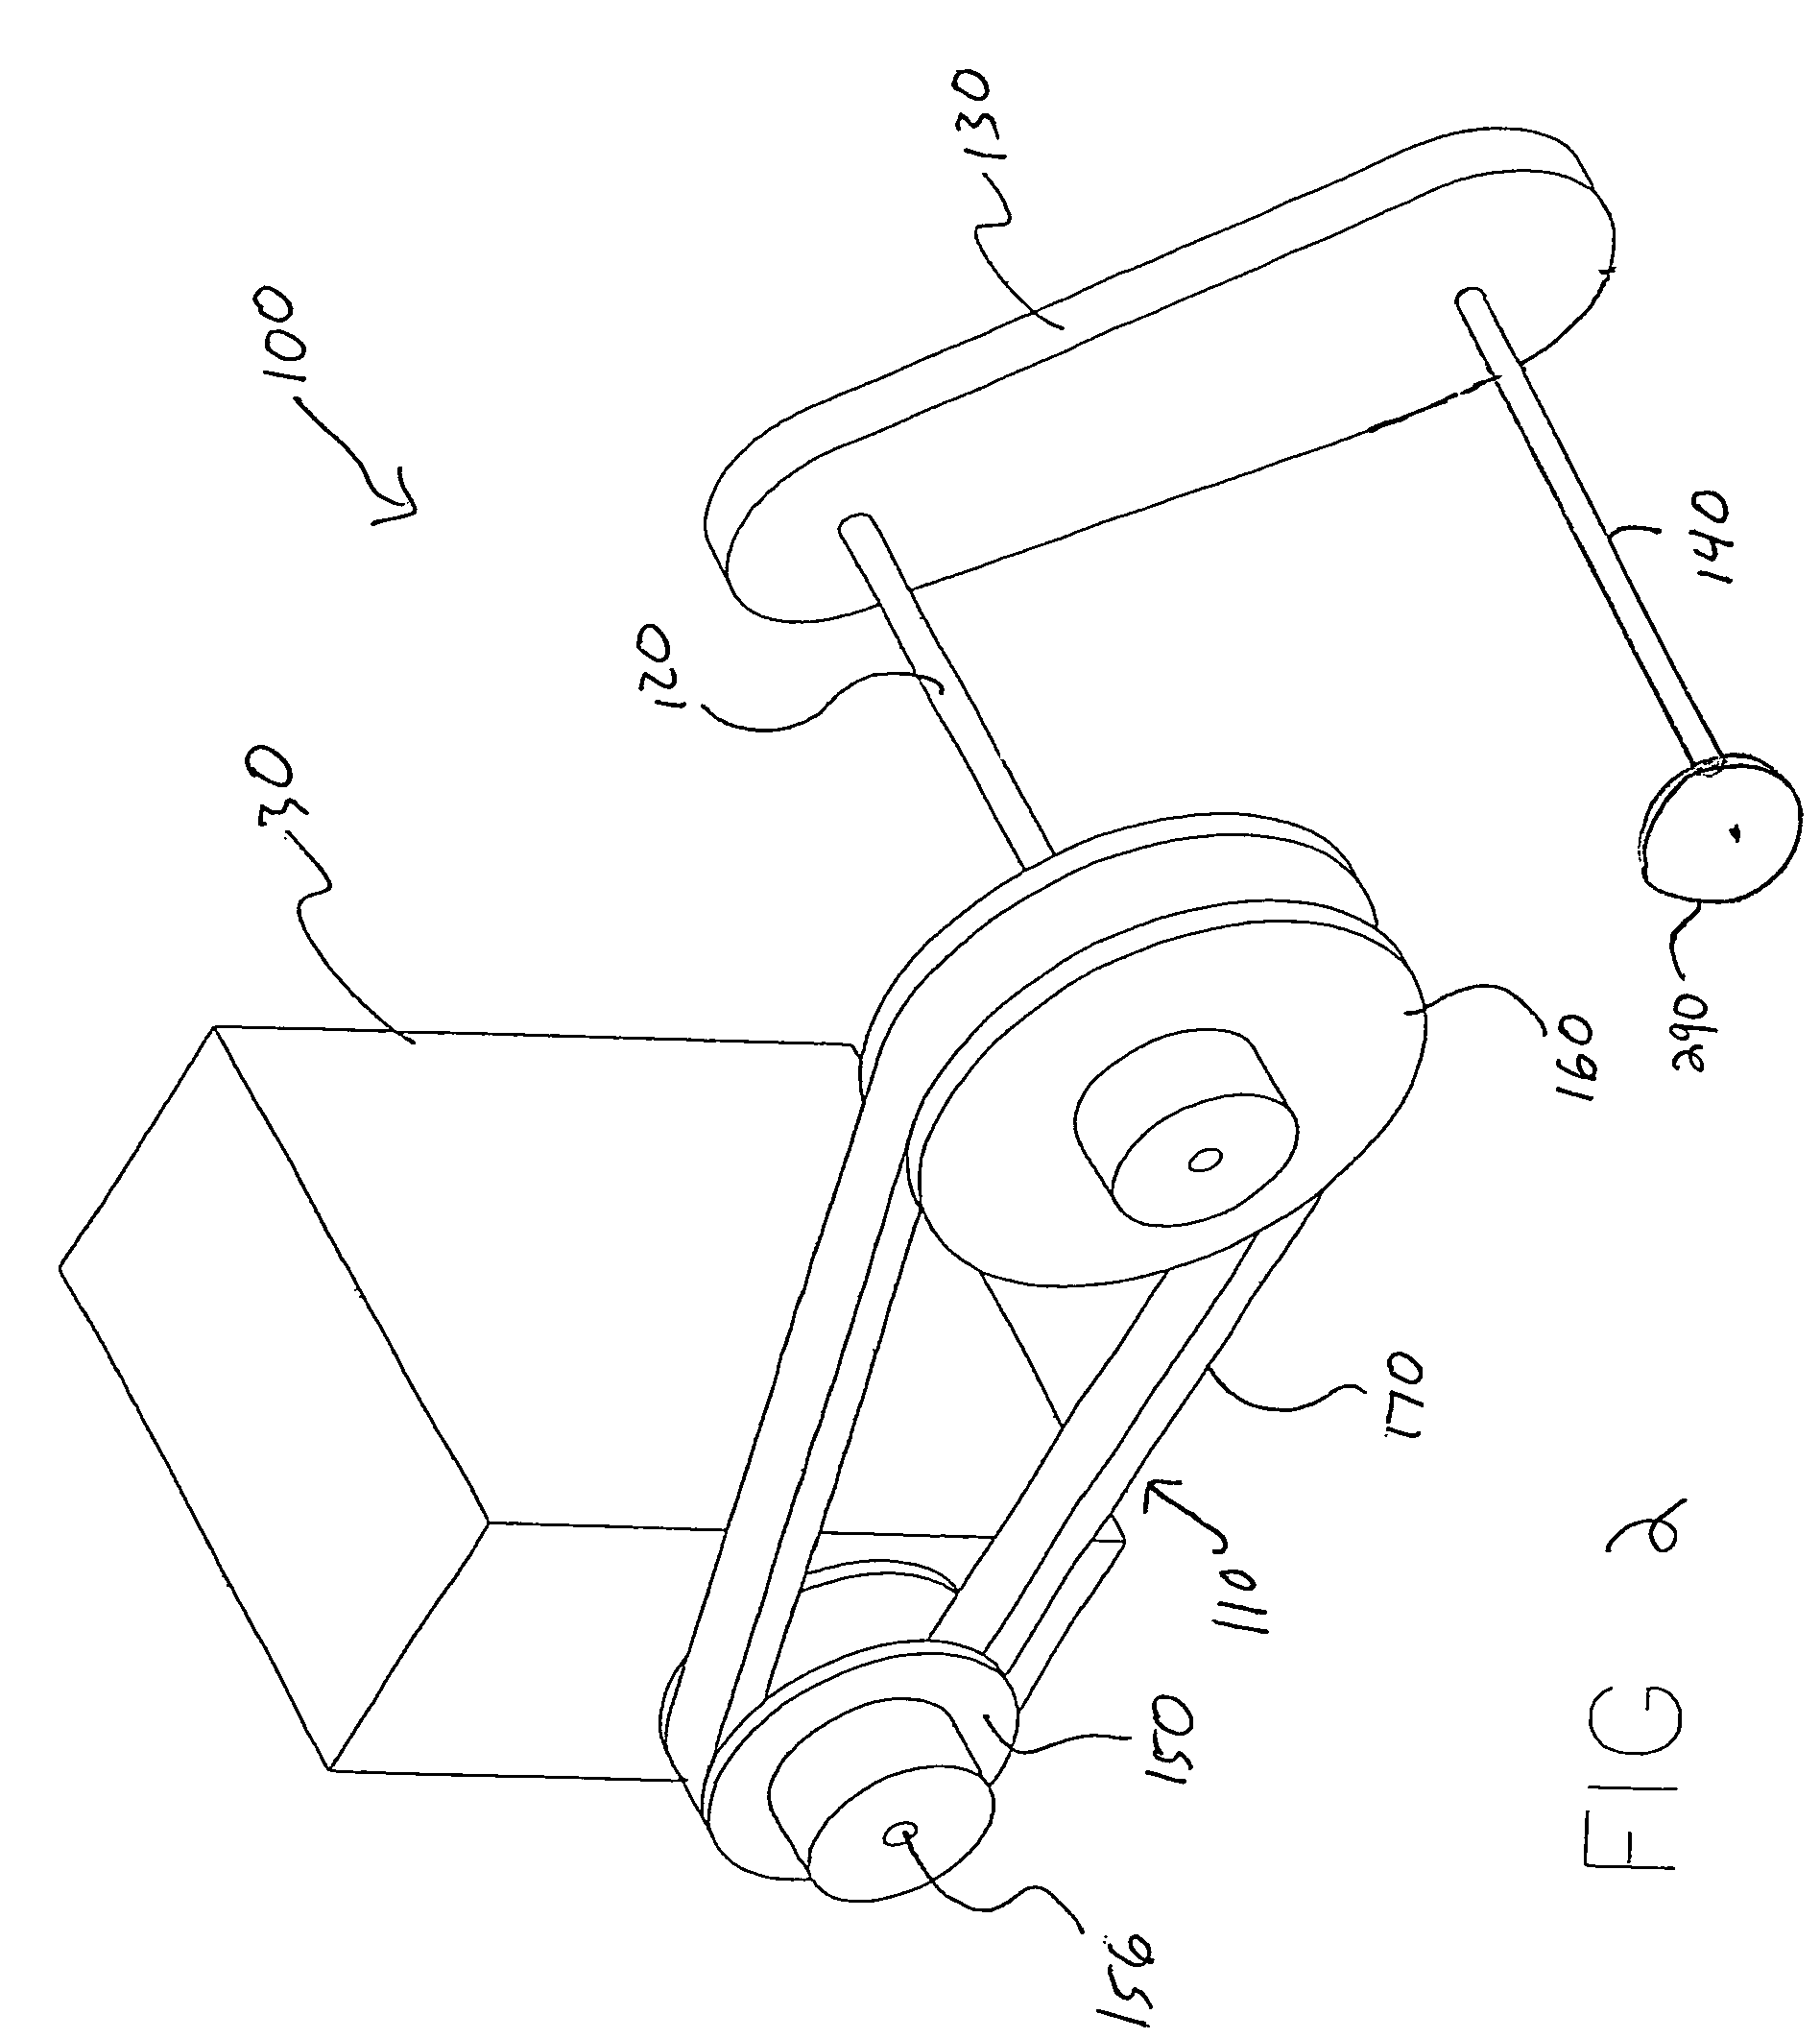 Shifting gear system and method